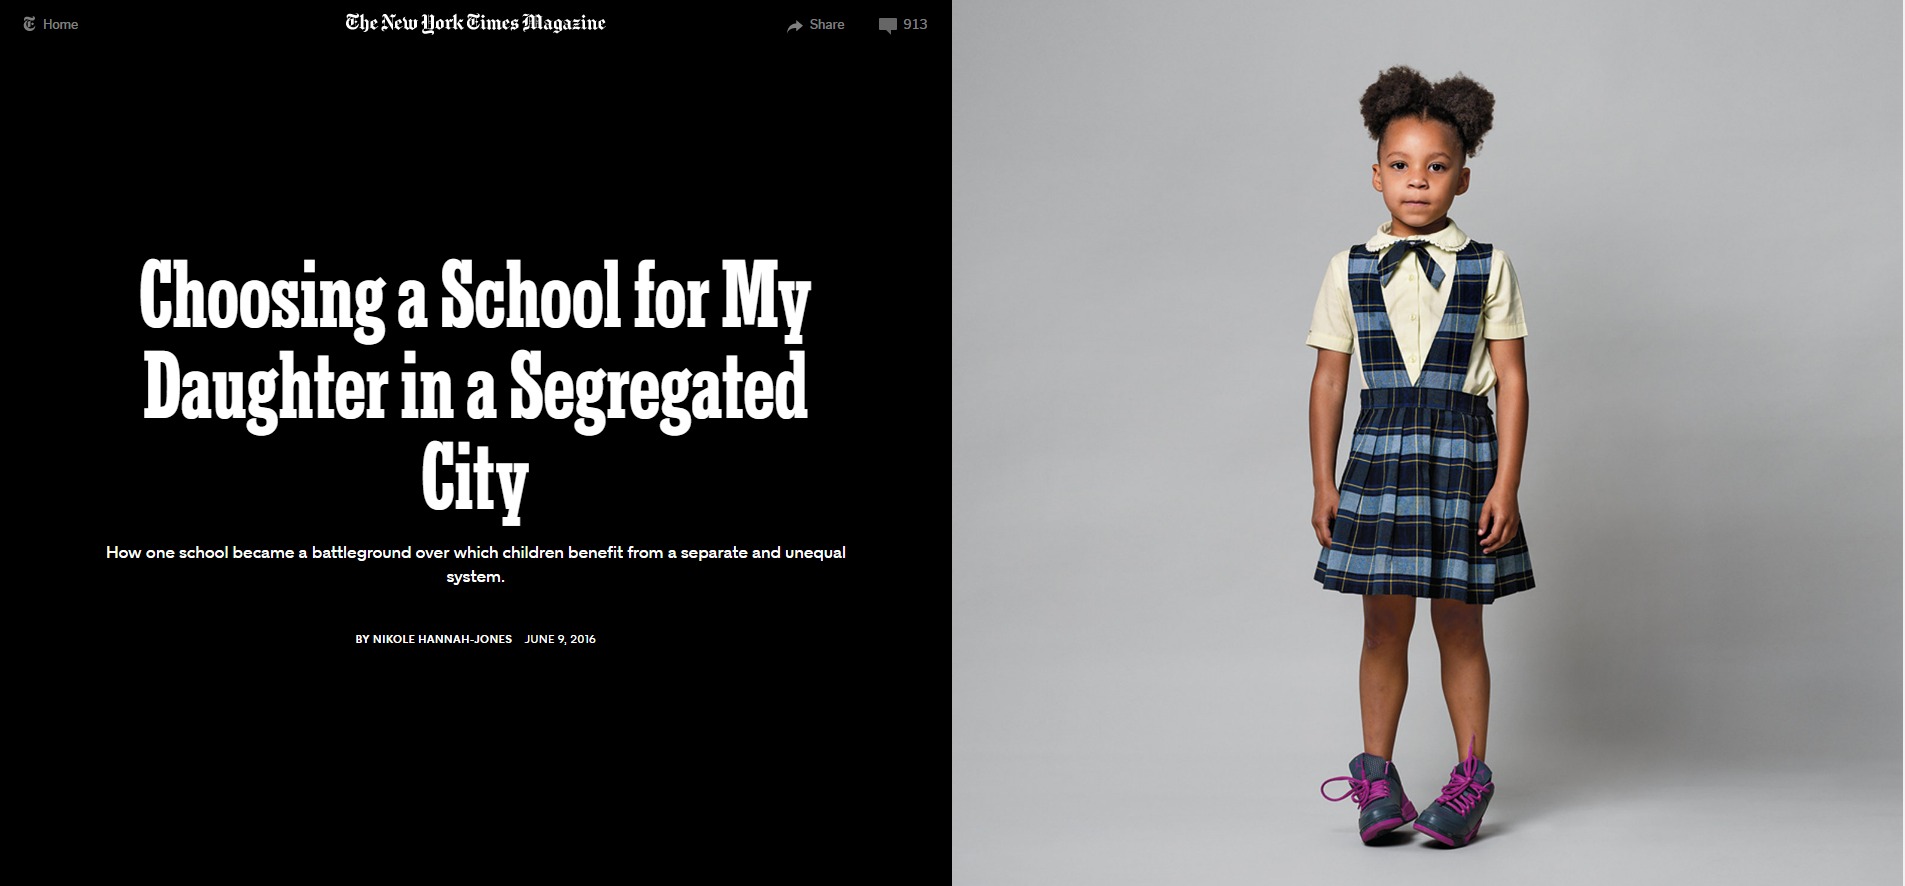 choosing_a_school_for_my_daughter_in_a_segregated_city___the_new_york_times